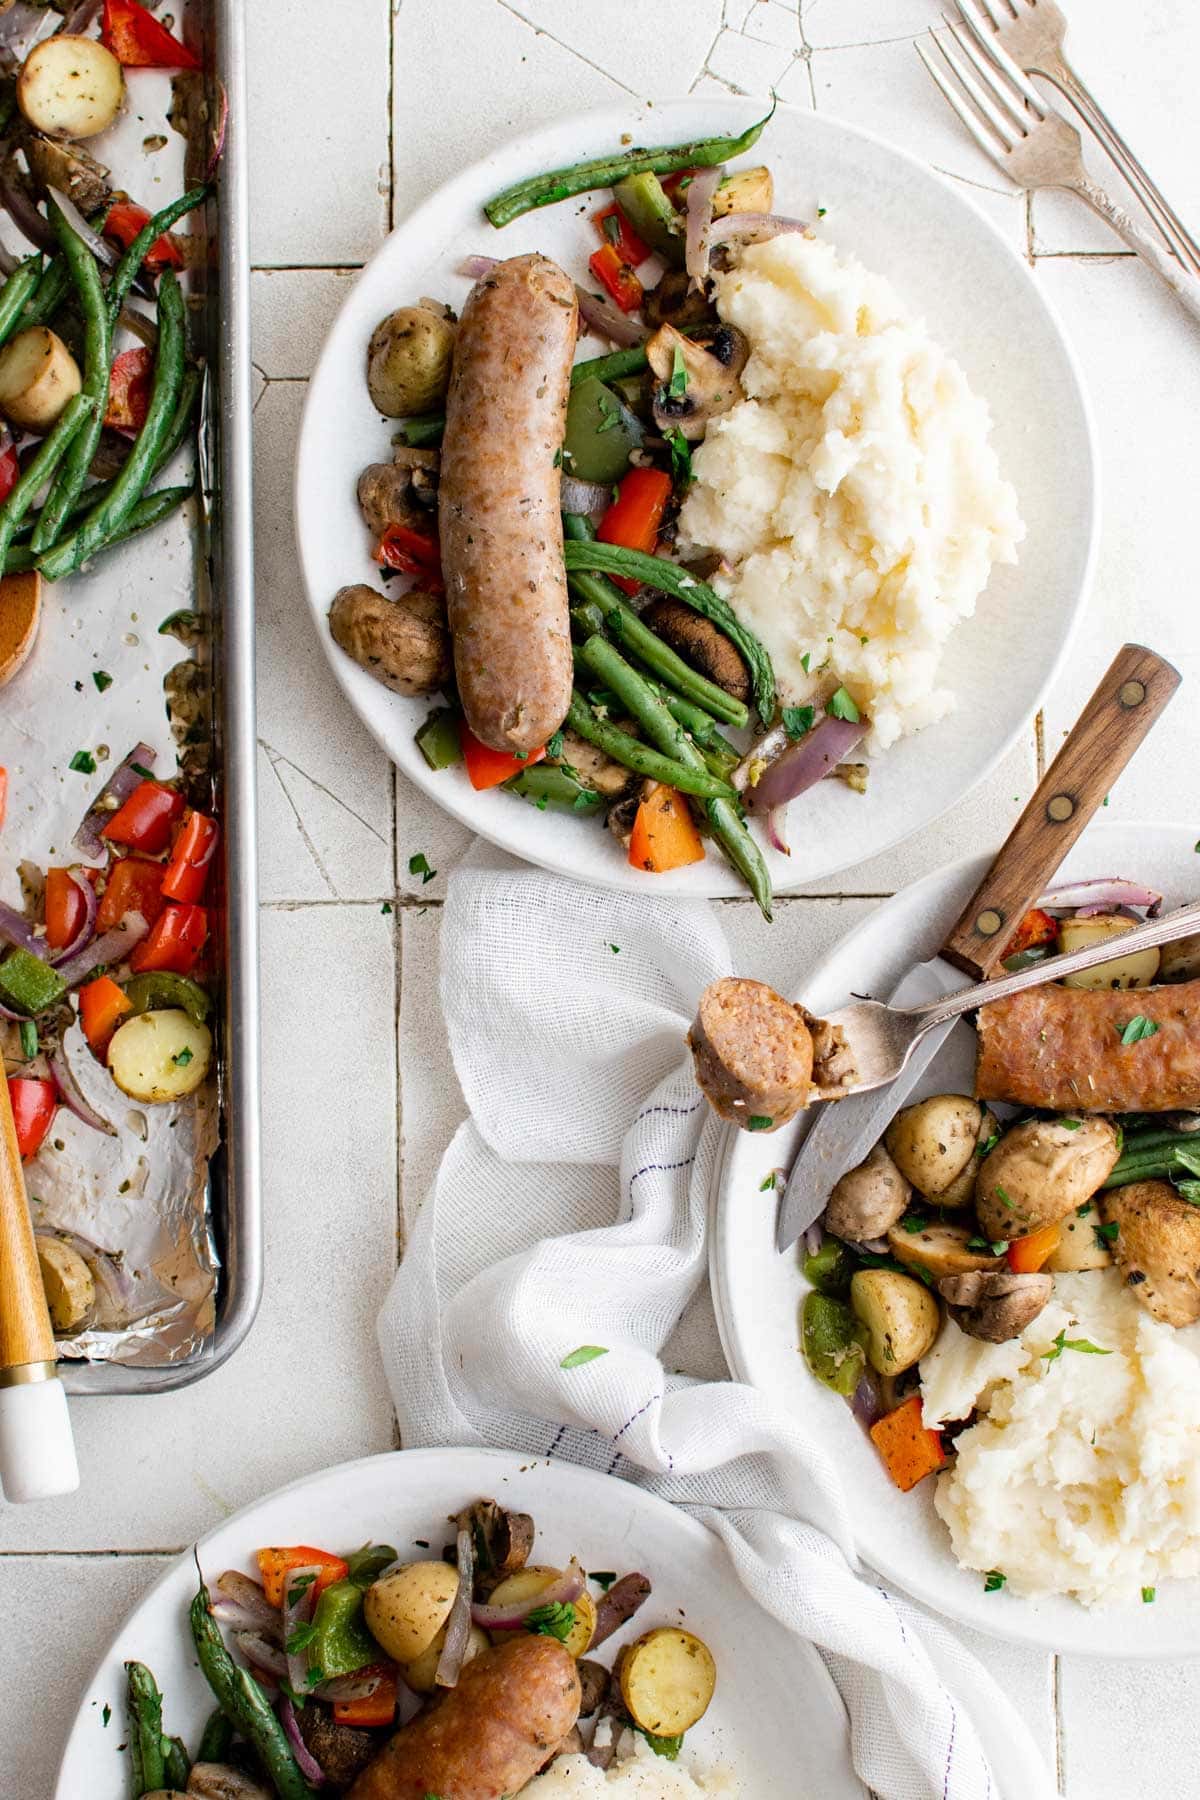 three plates with sausages, vegetables and mashed potatoes